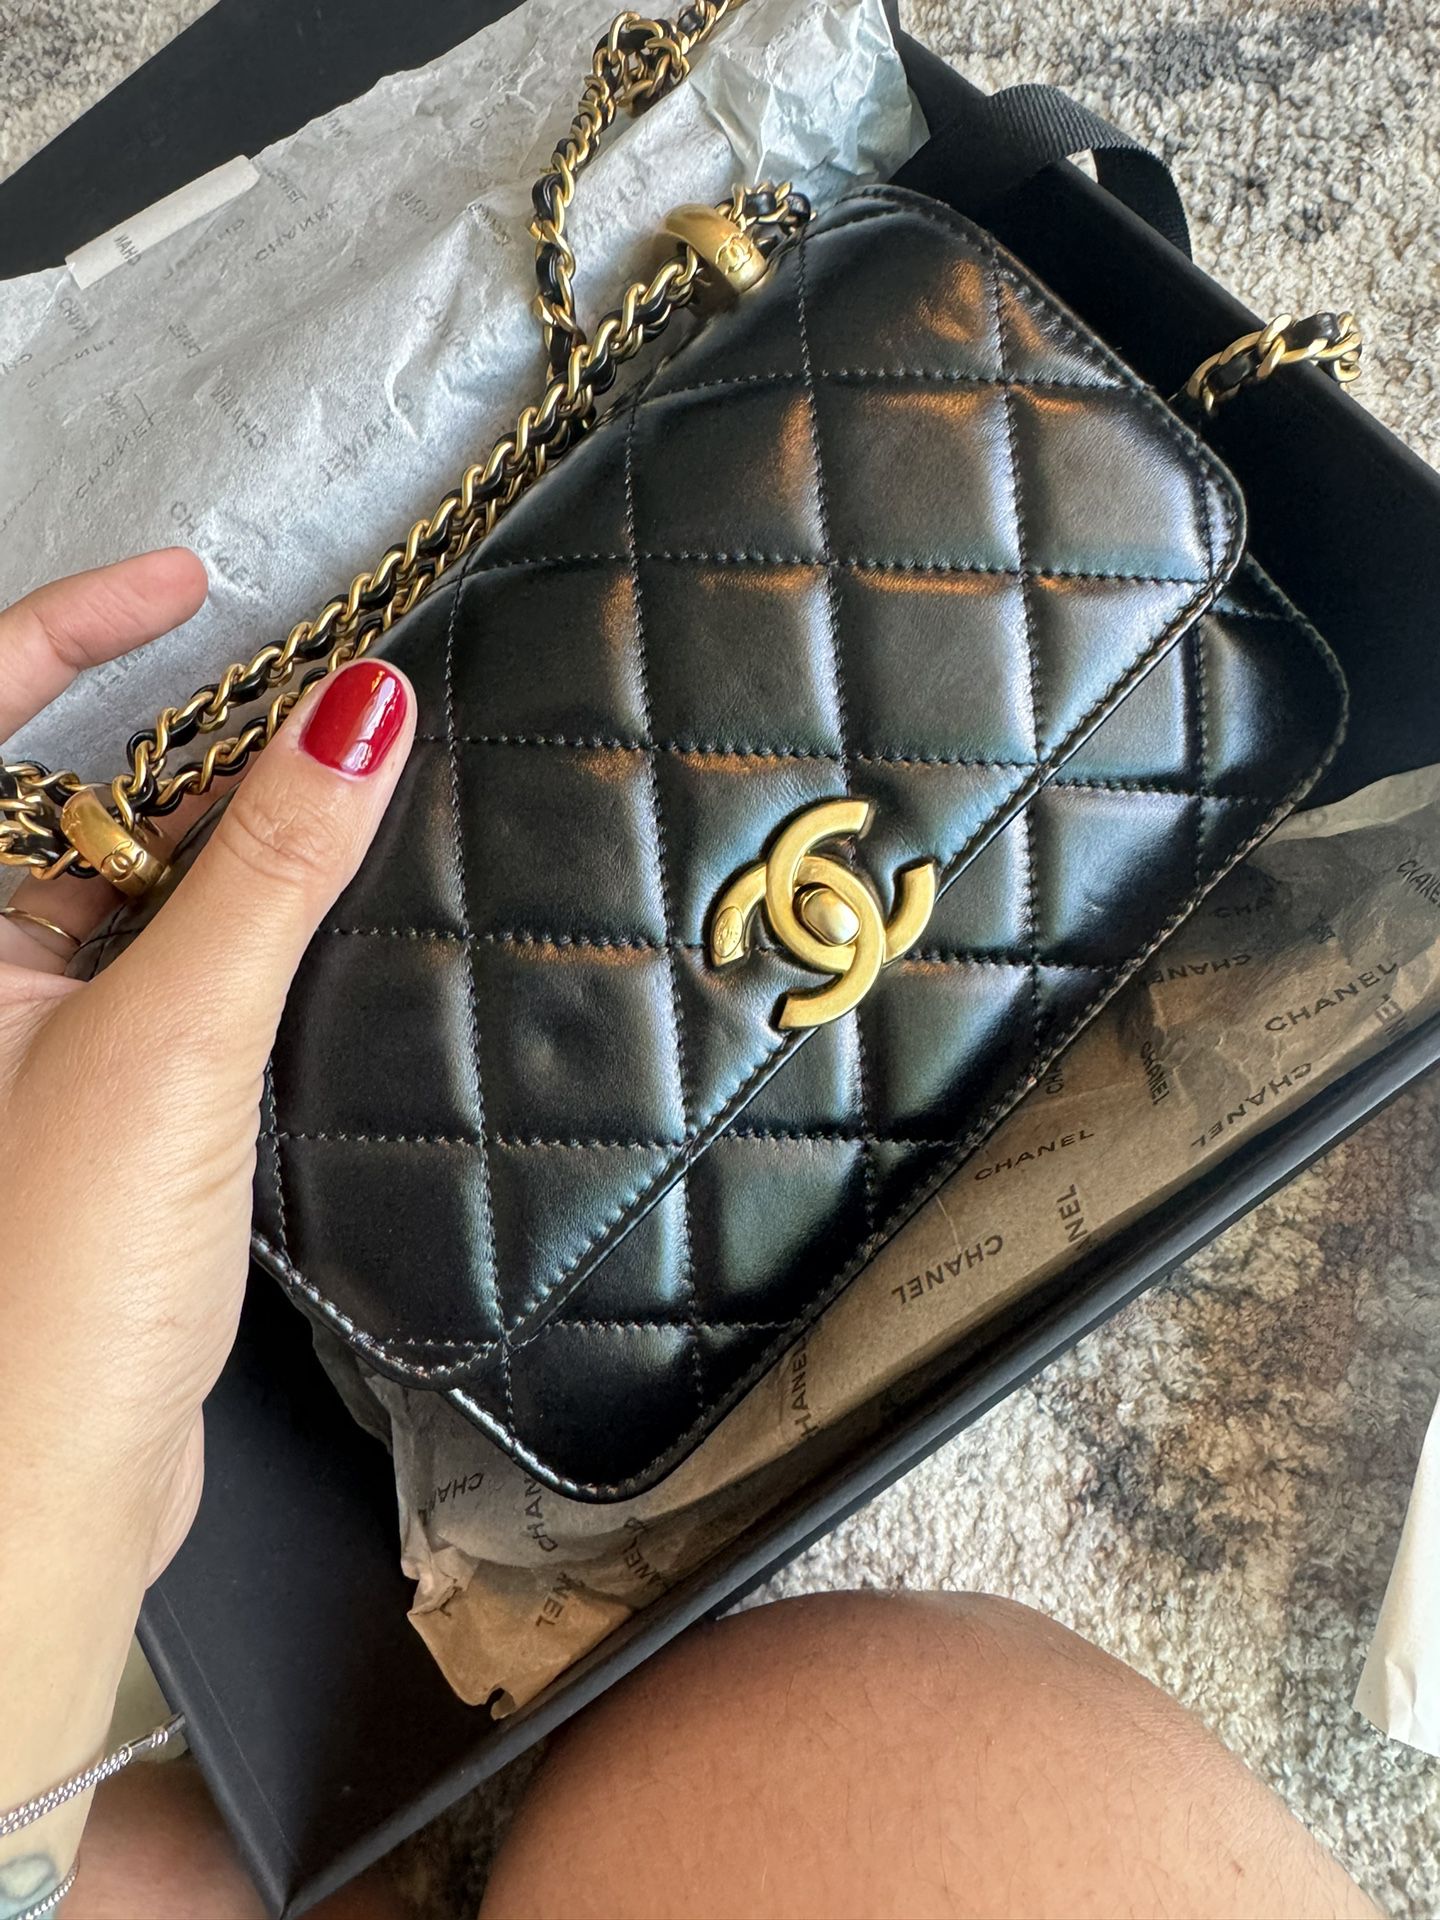 Chanel Bag Great Condition